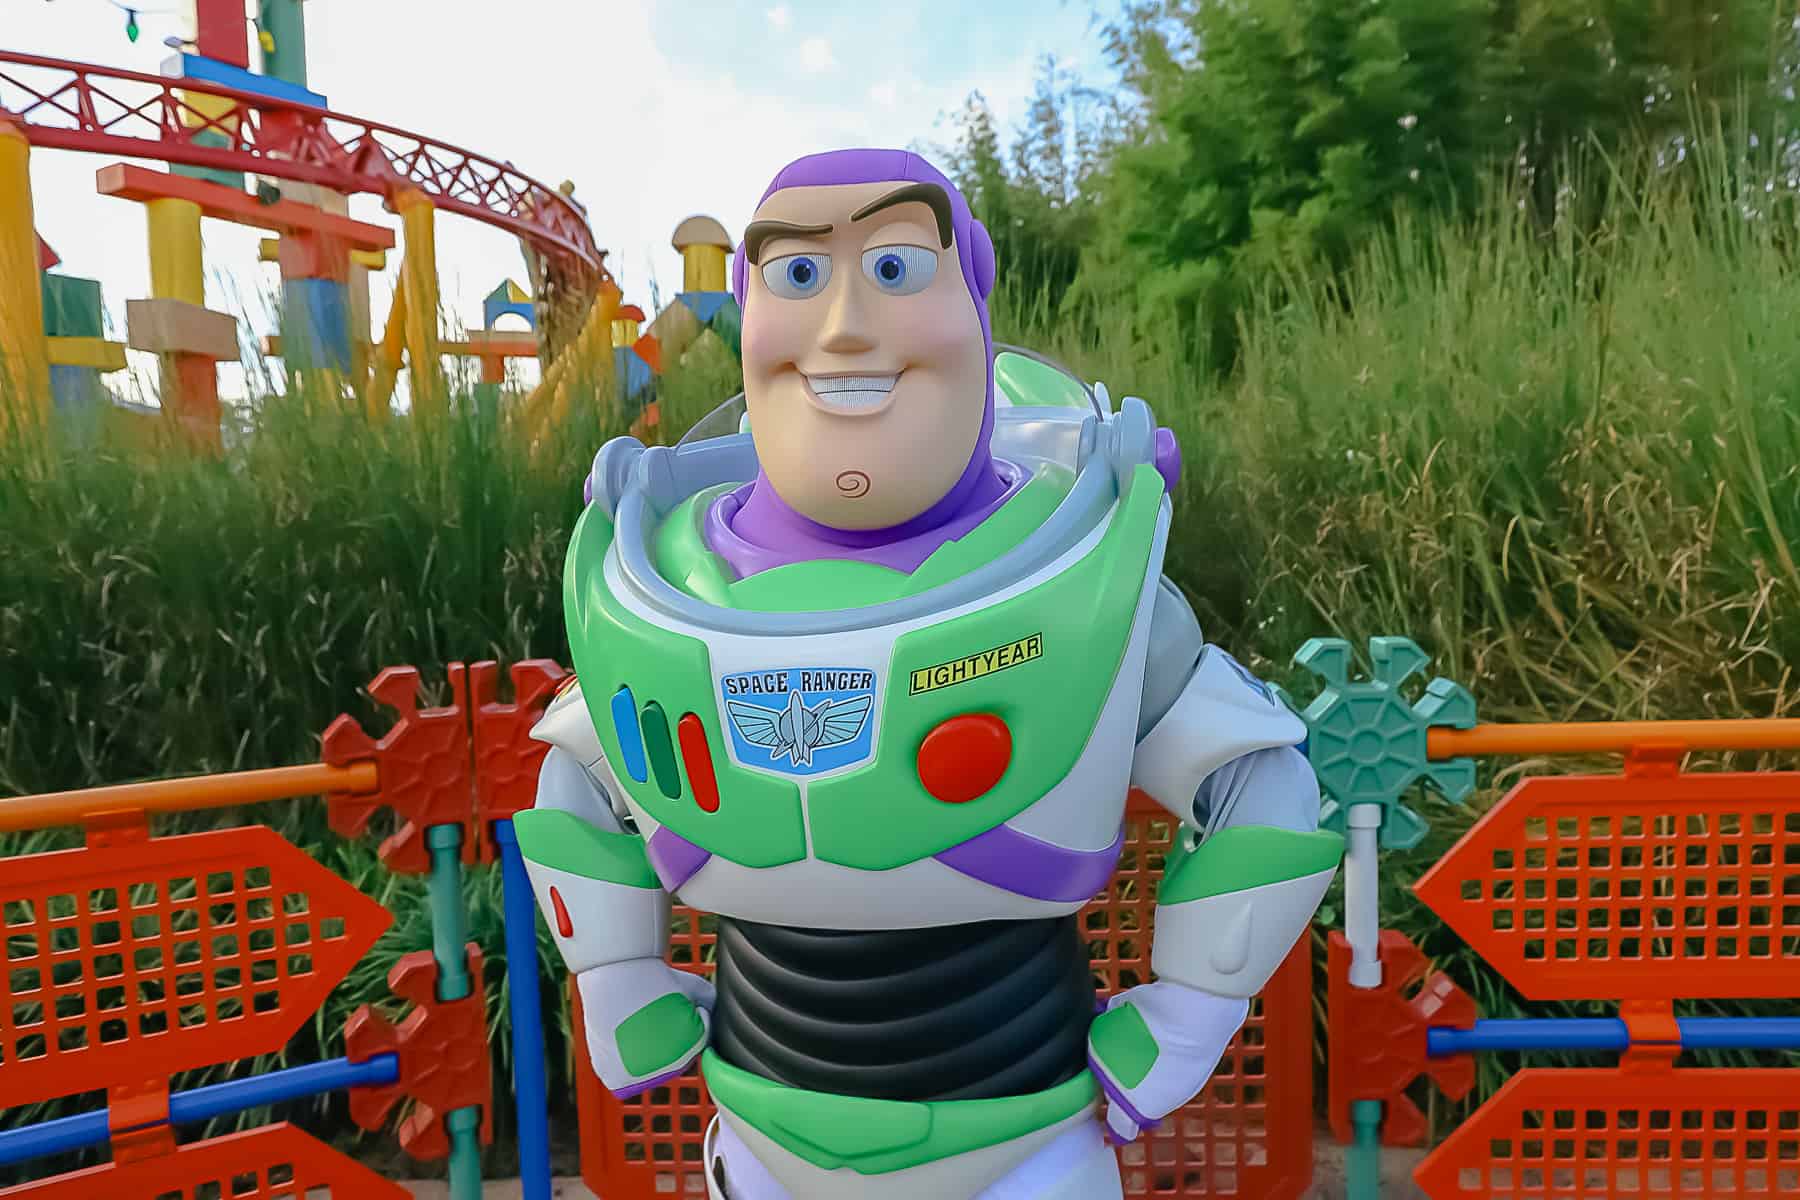 Buzz Lightyear poses in front of the fence at Toy Story Land. 